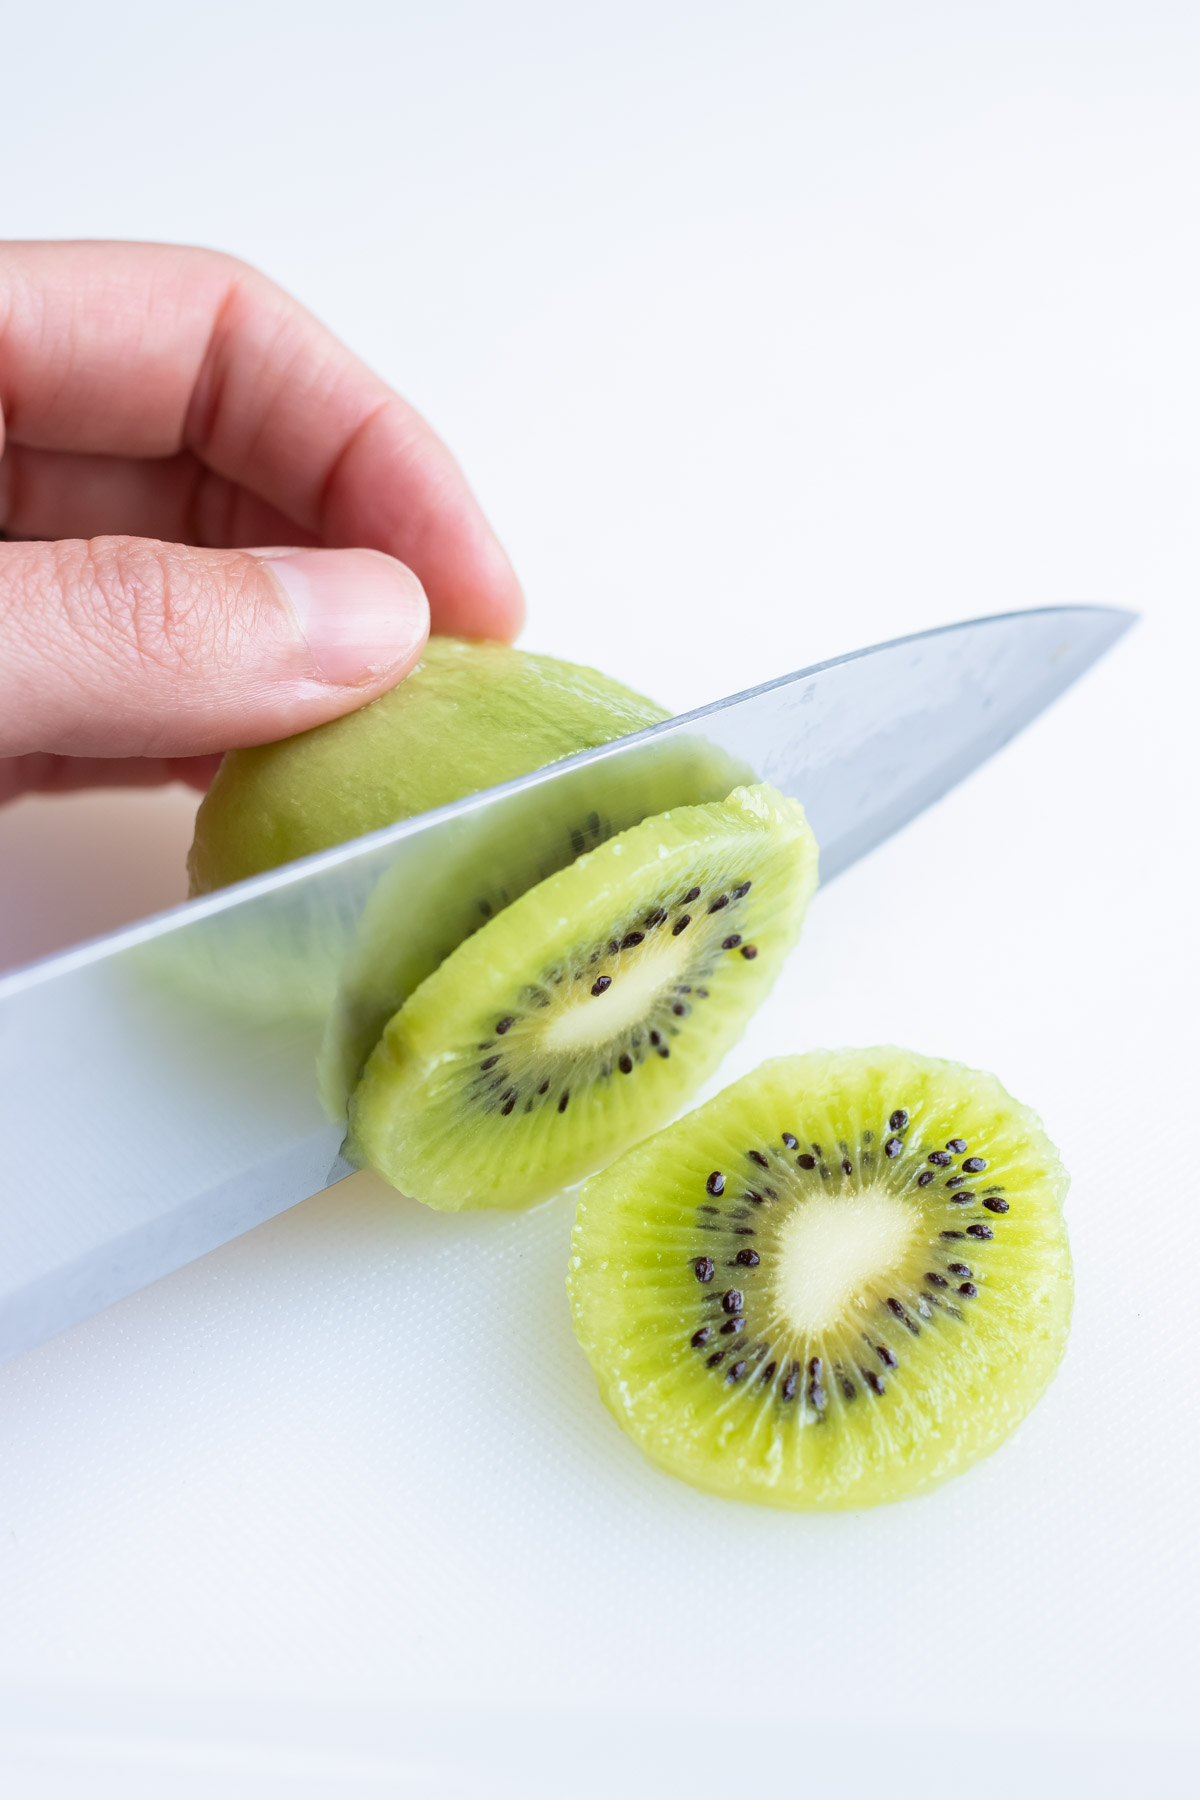 A knife is used to create slices of kiwi.